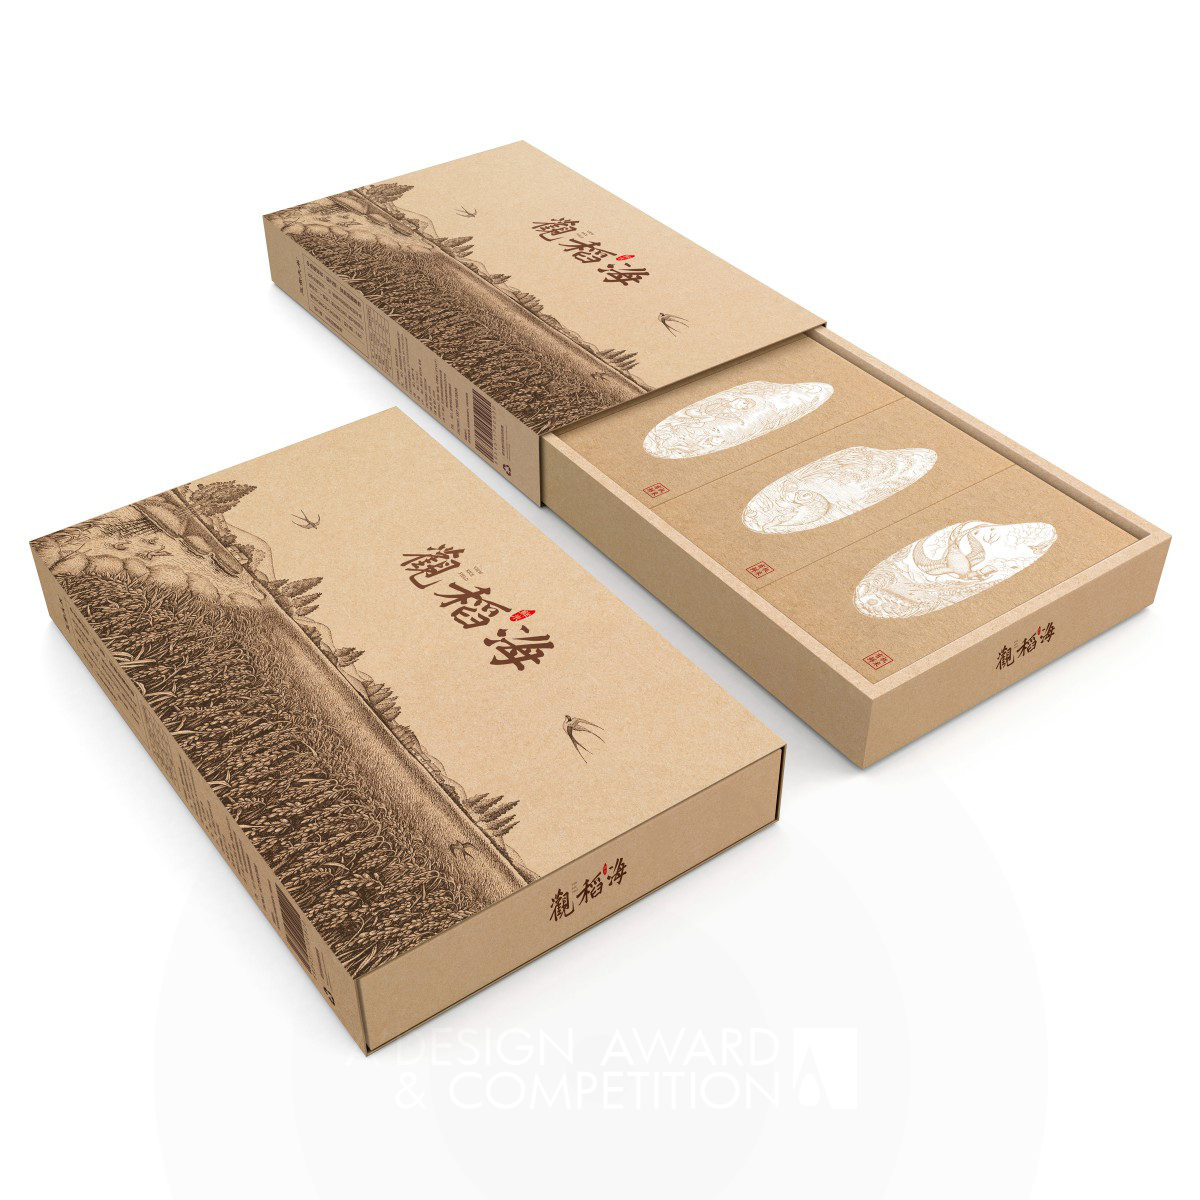 Organic Rice Package by Yong Huang